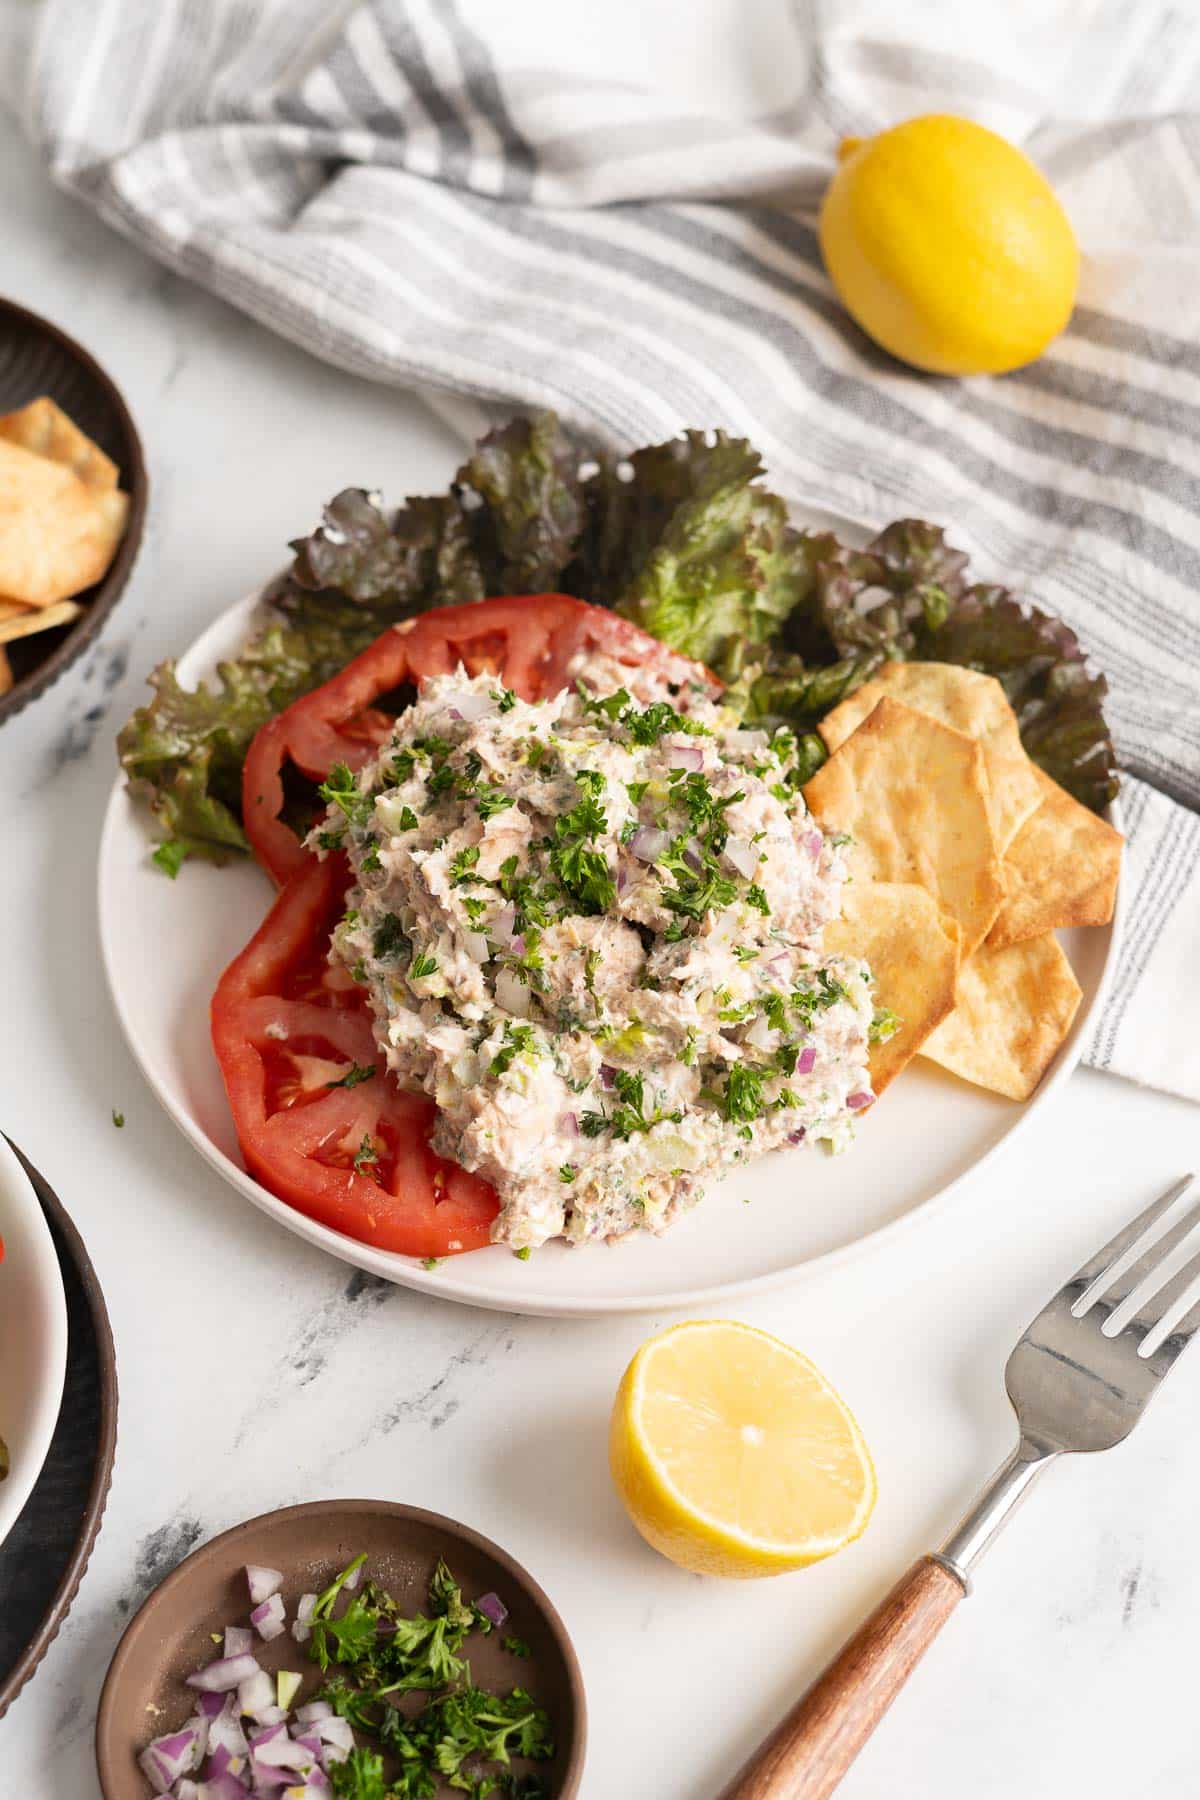 Canned salmon salad on a plate.